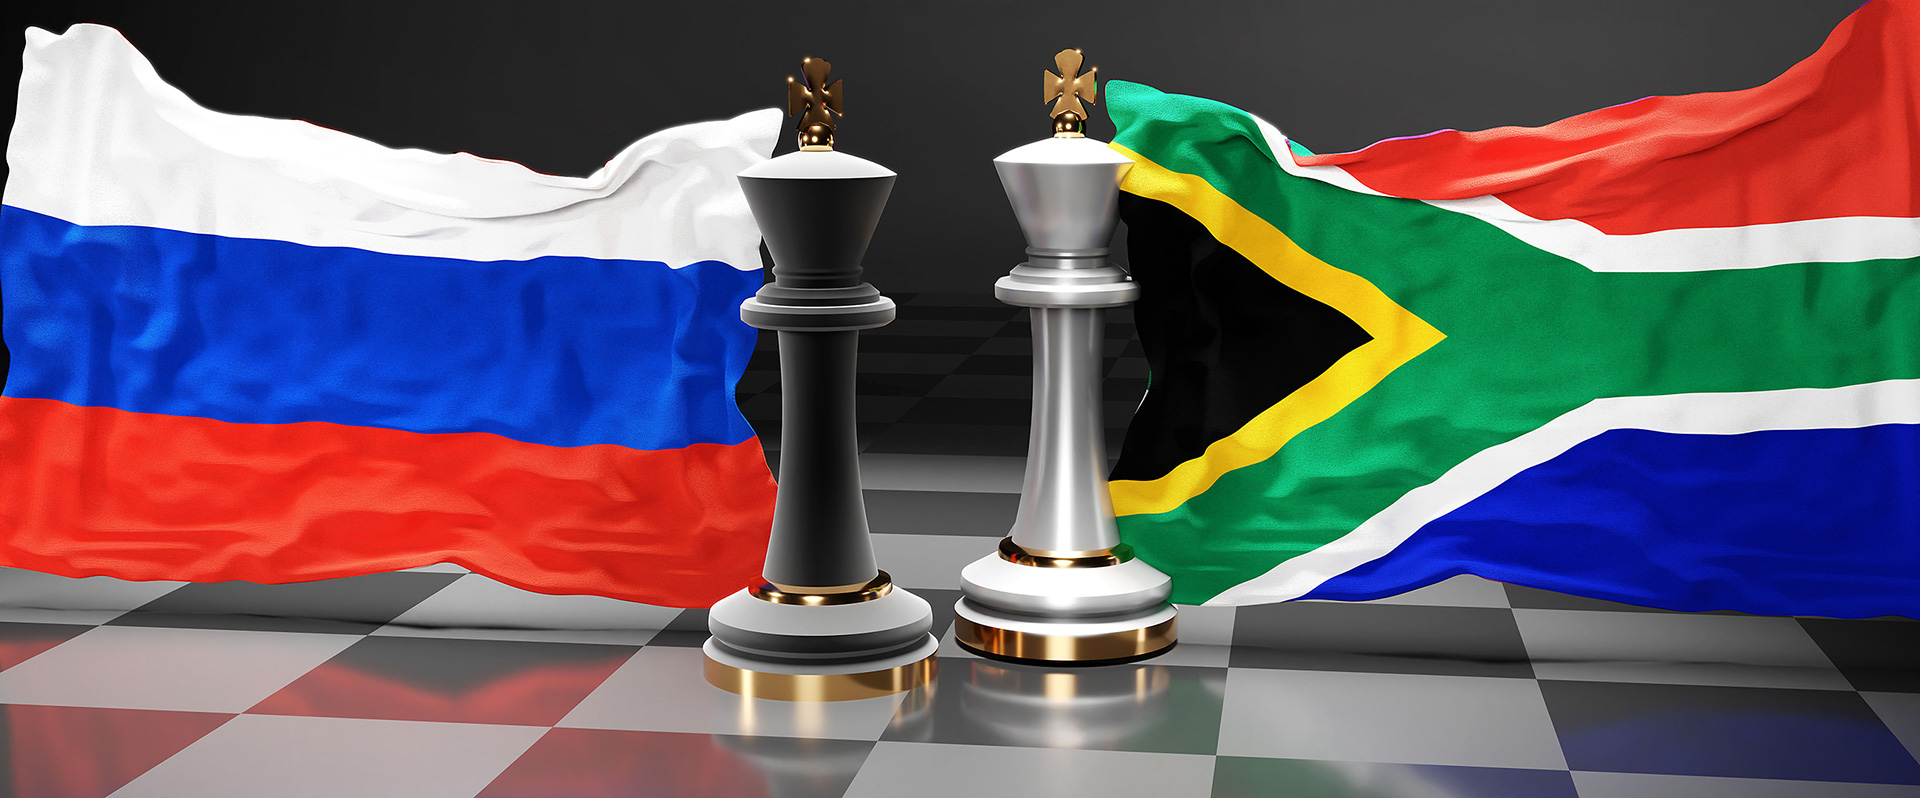 Is South Africa Taking a Financial Risk by Conducting Naval Exercises with Russia?